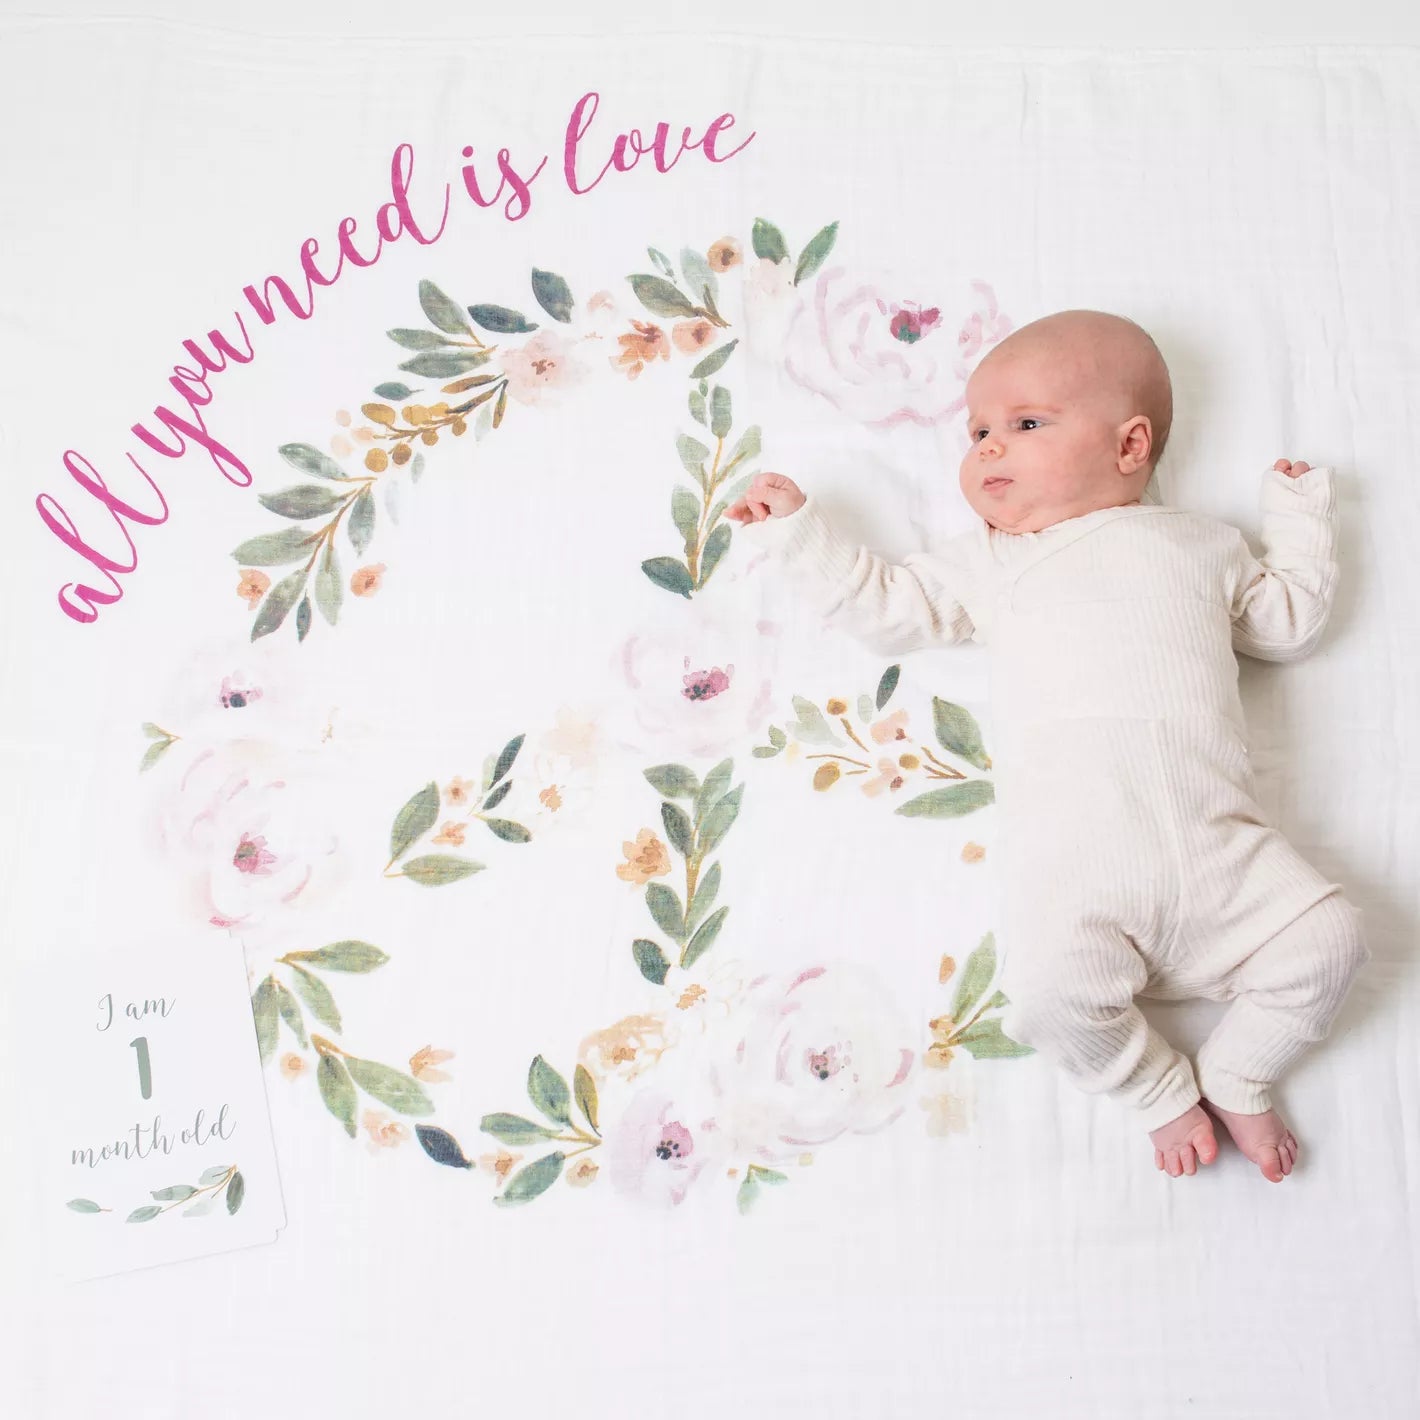 Baby's First Yearª Blanket & Cards Set -  All You Need is Love